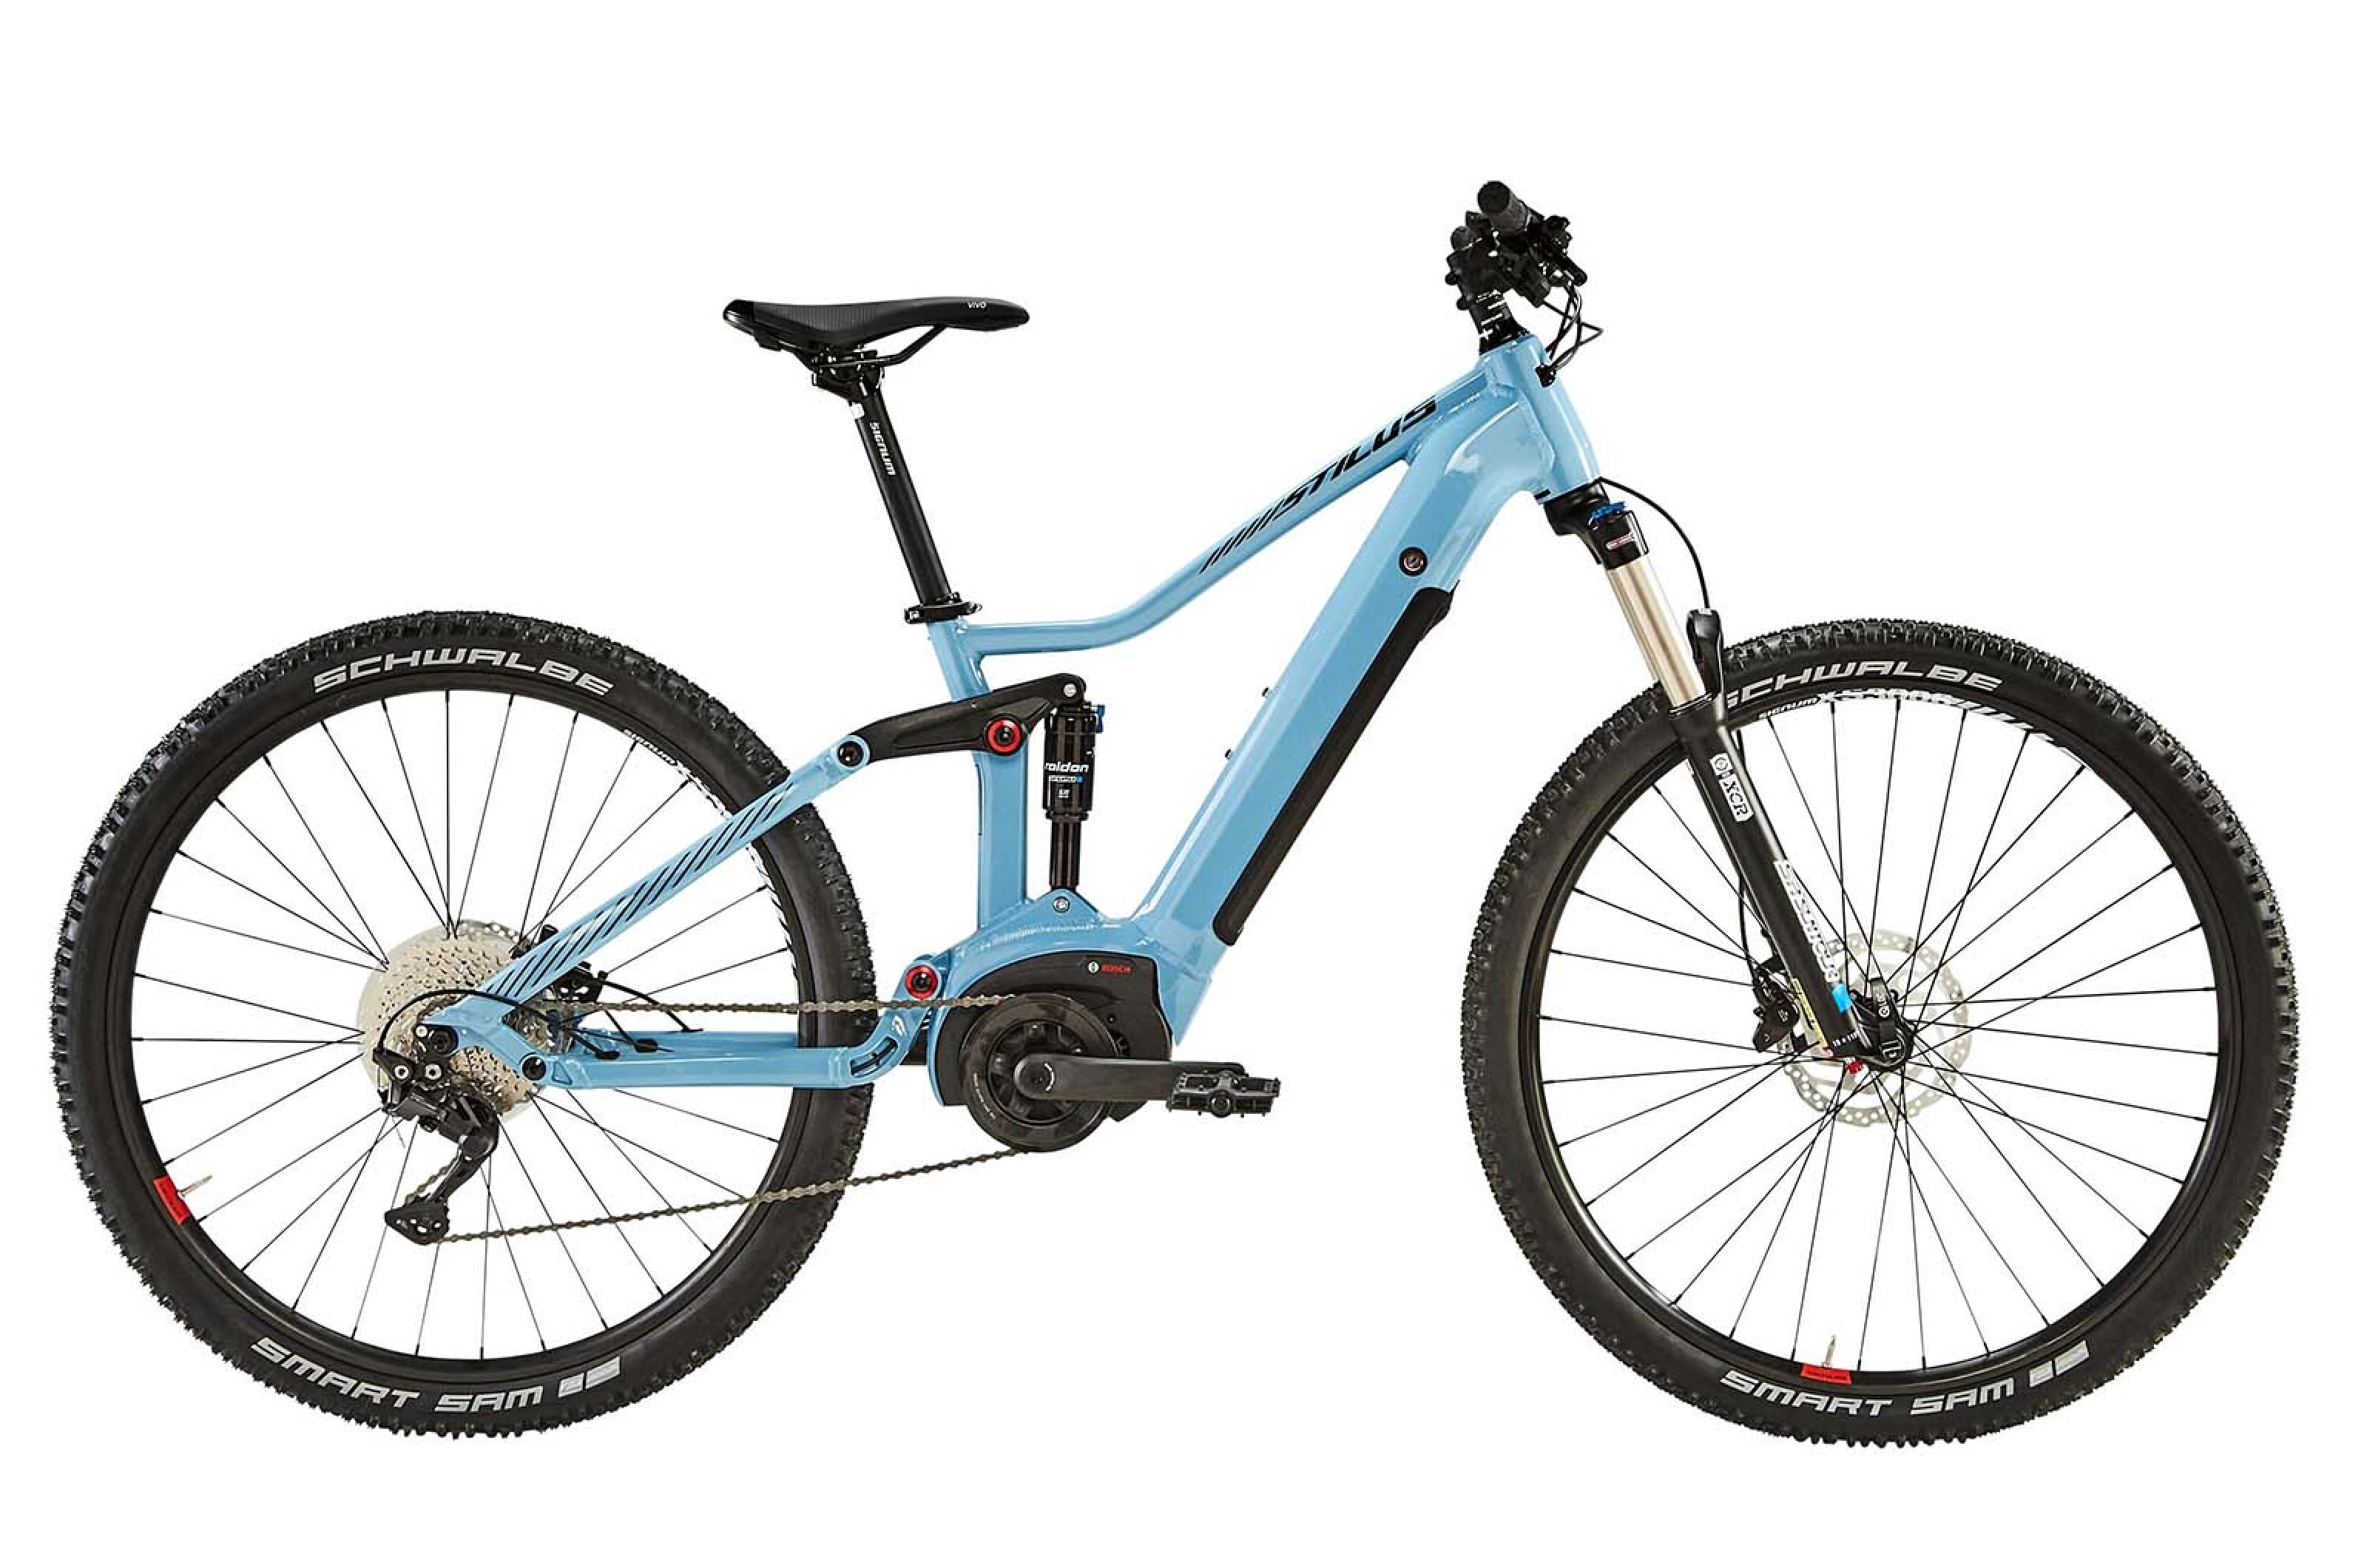 <p>Choosing an electric mountain bike when you’re on a tight budget doesn’t necessarily mean you have to skimp on quality. This offering from Decathlon uses Bosch’s Performance Line 65Nm mid-drive motor and 500Wh battery, which for under £3k is pretty good value.</p>  <p>The suspension is provided by Suntour with 130mm travel up front and on the rear, and a Shimano Deore 10-speed drivetrain. There are compromises, but for the money, you can always upgrade these components later – the electrical system and frame is more important. </p>